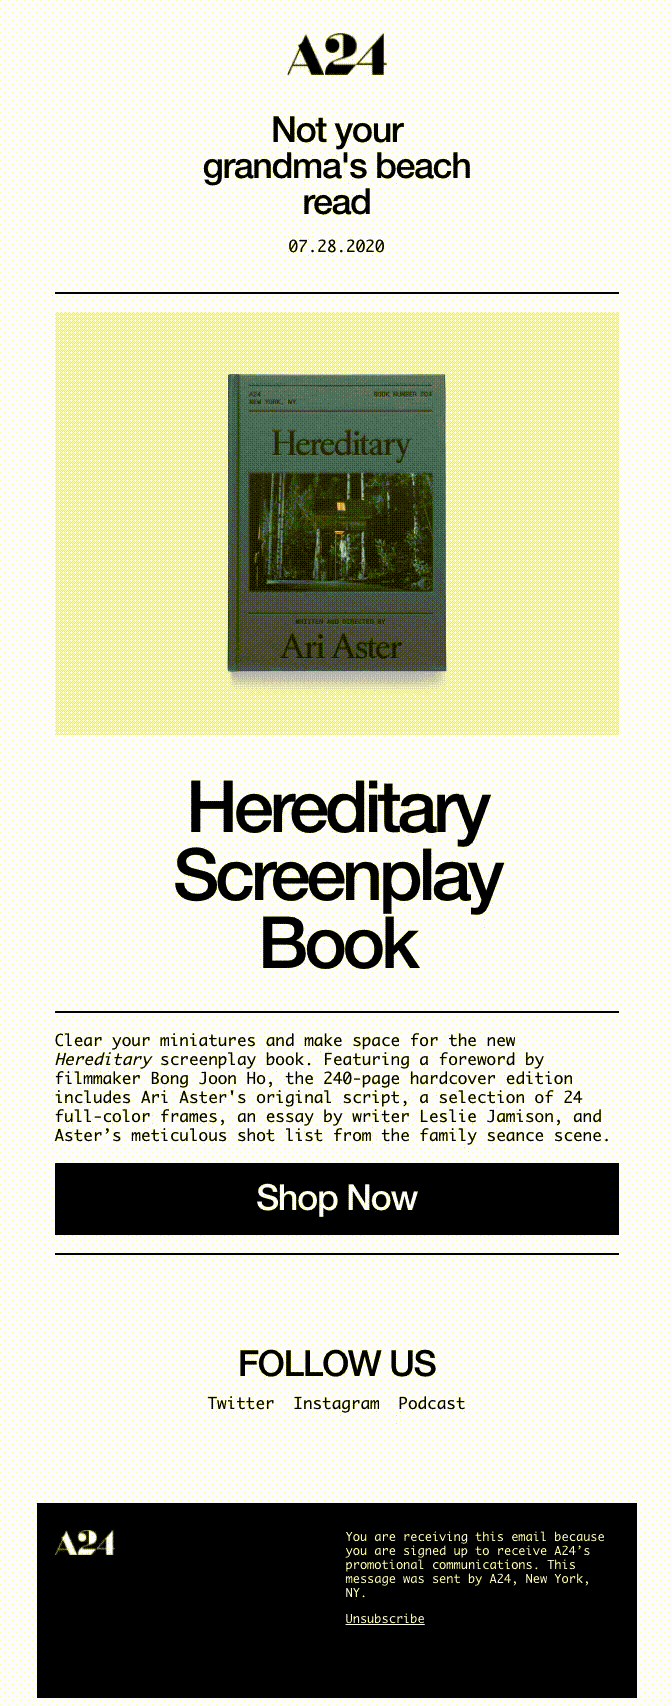 Make room on your shelf for the Hereditary screenplay book